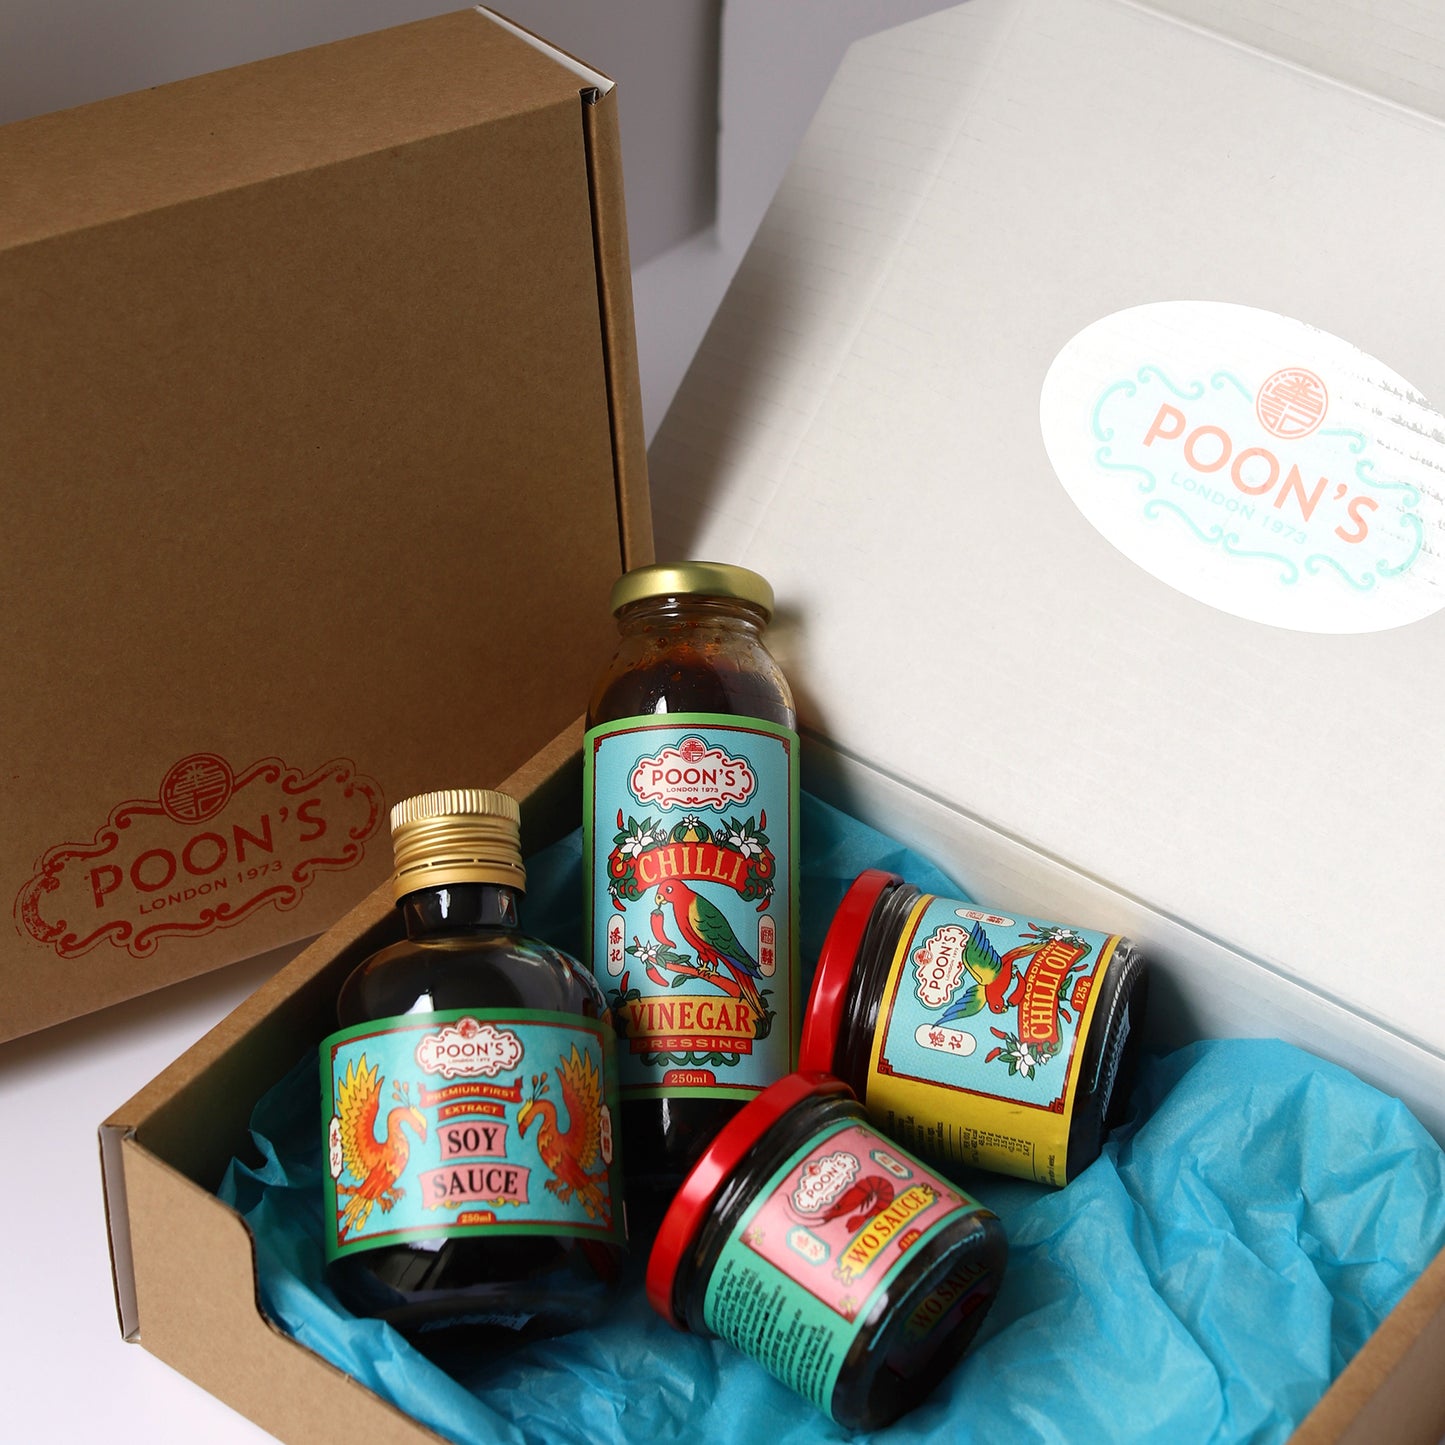 Poon's London Sauce Collection